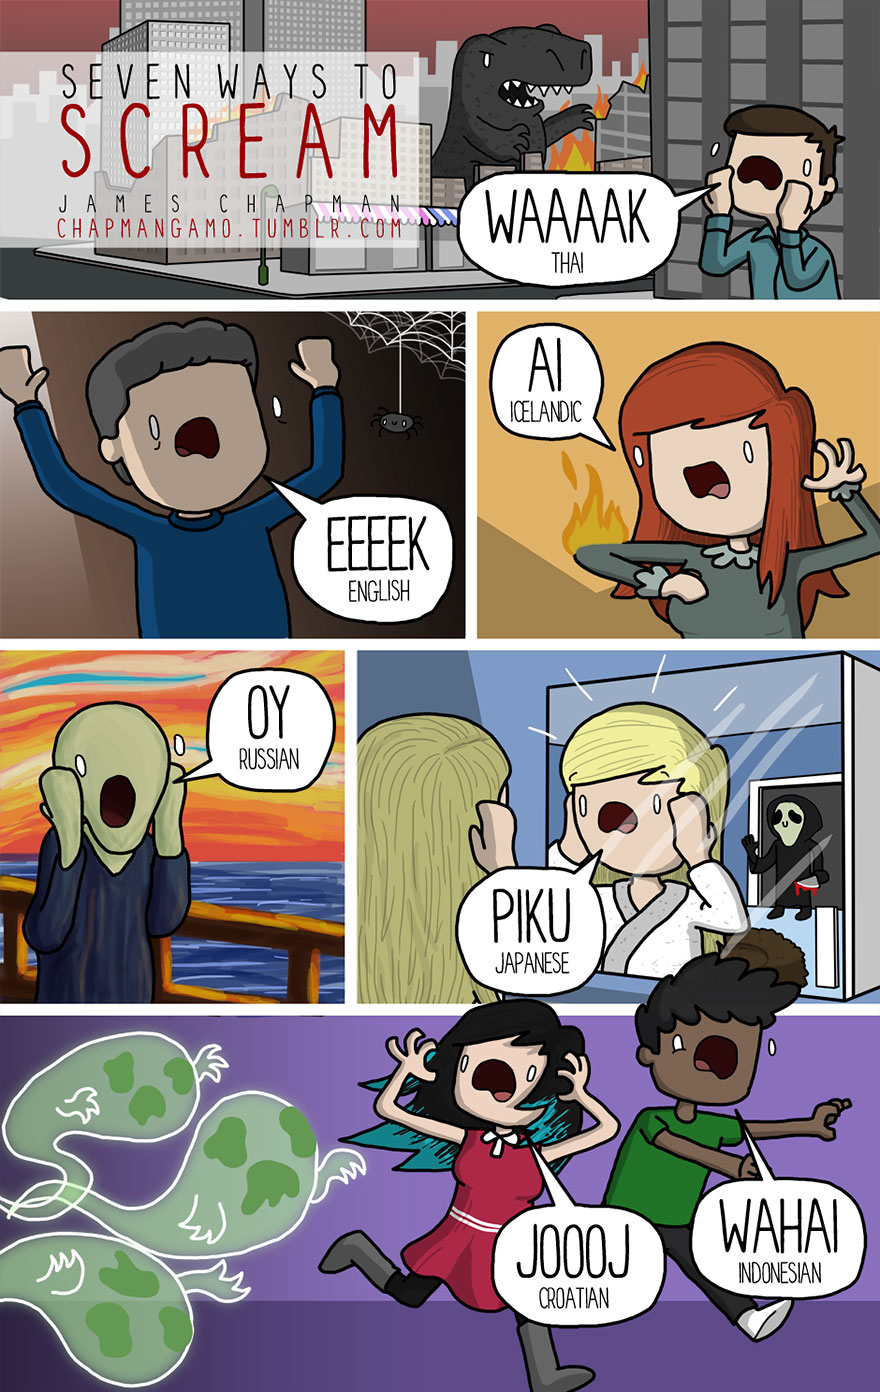 different-languages-expressions-illustrations-james-chapman-screaming